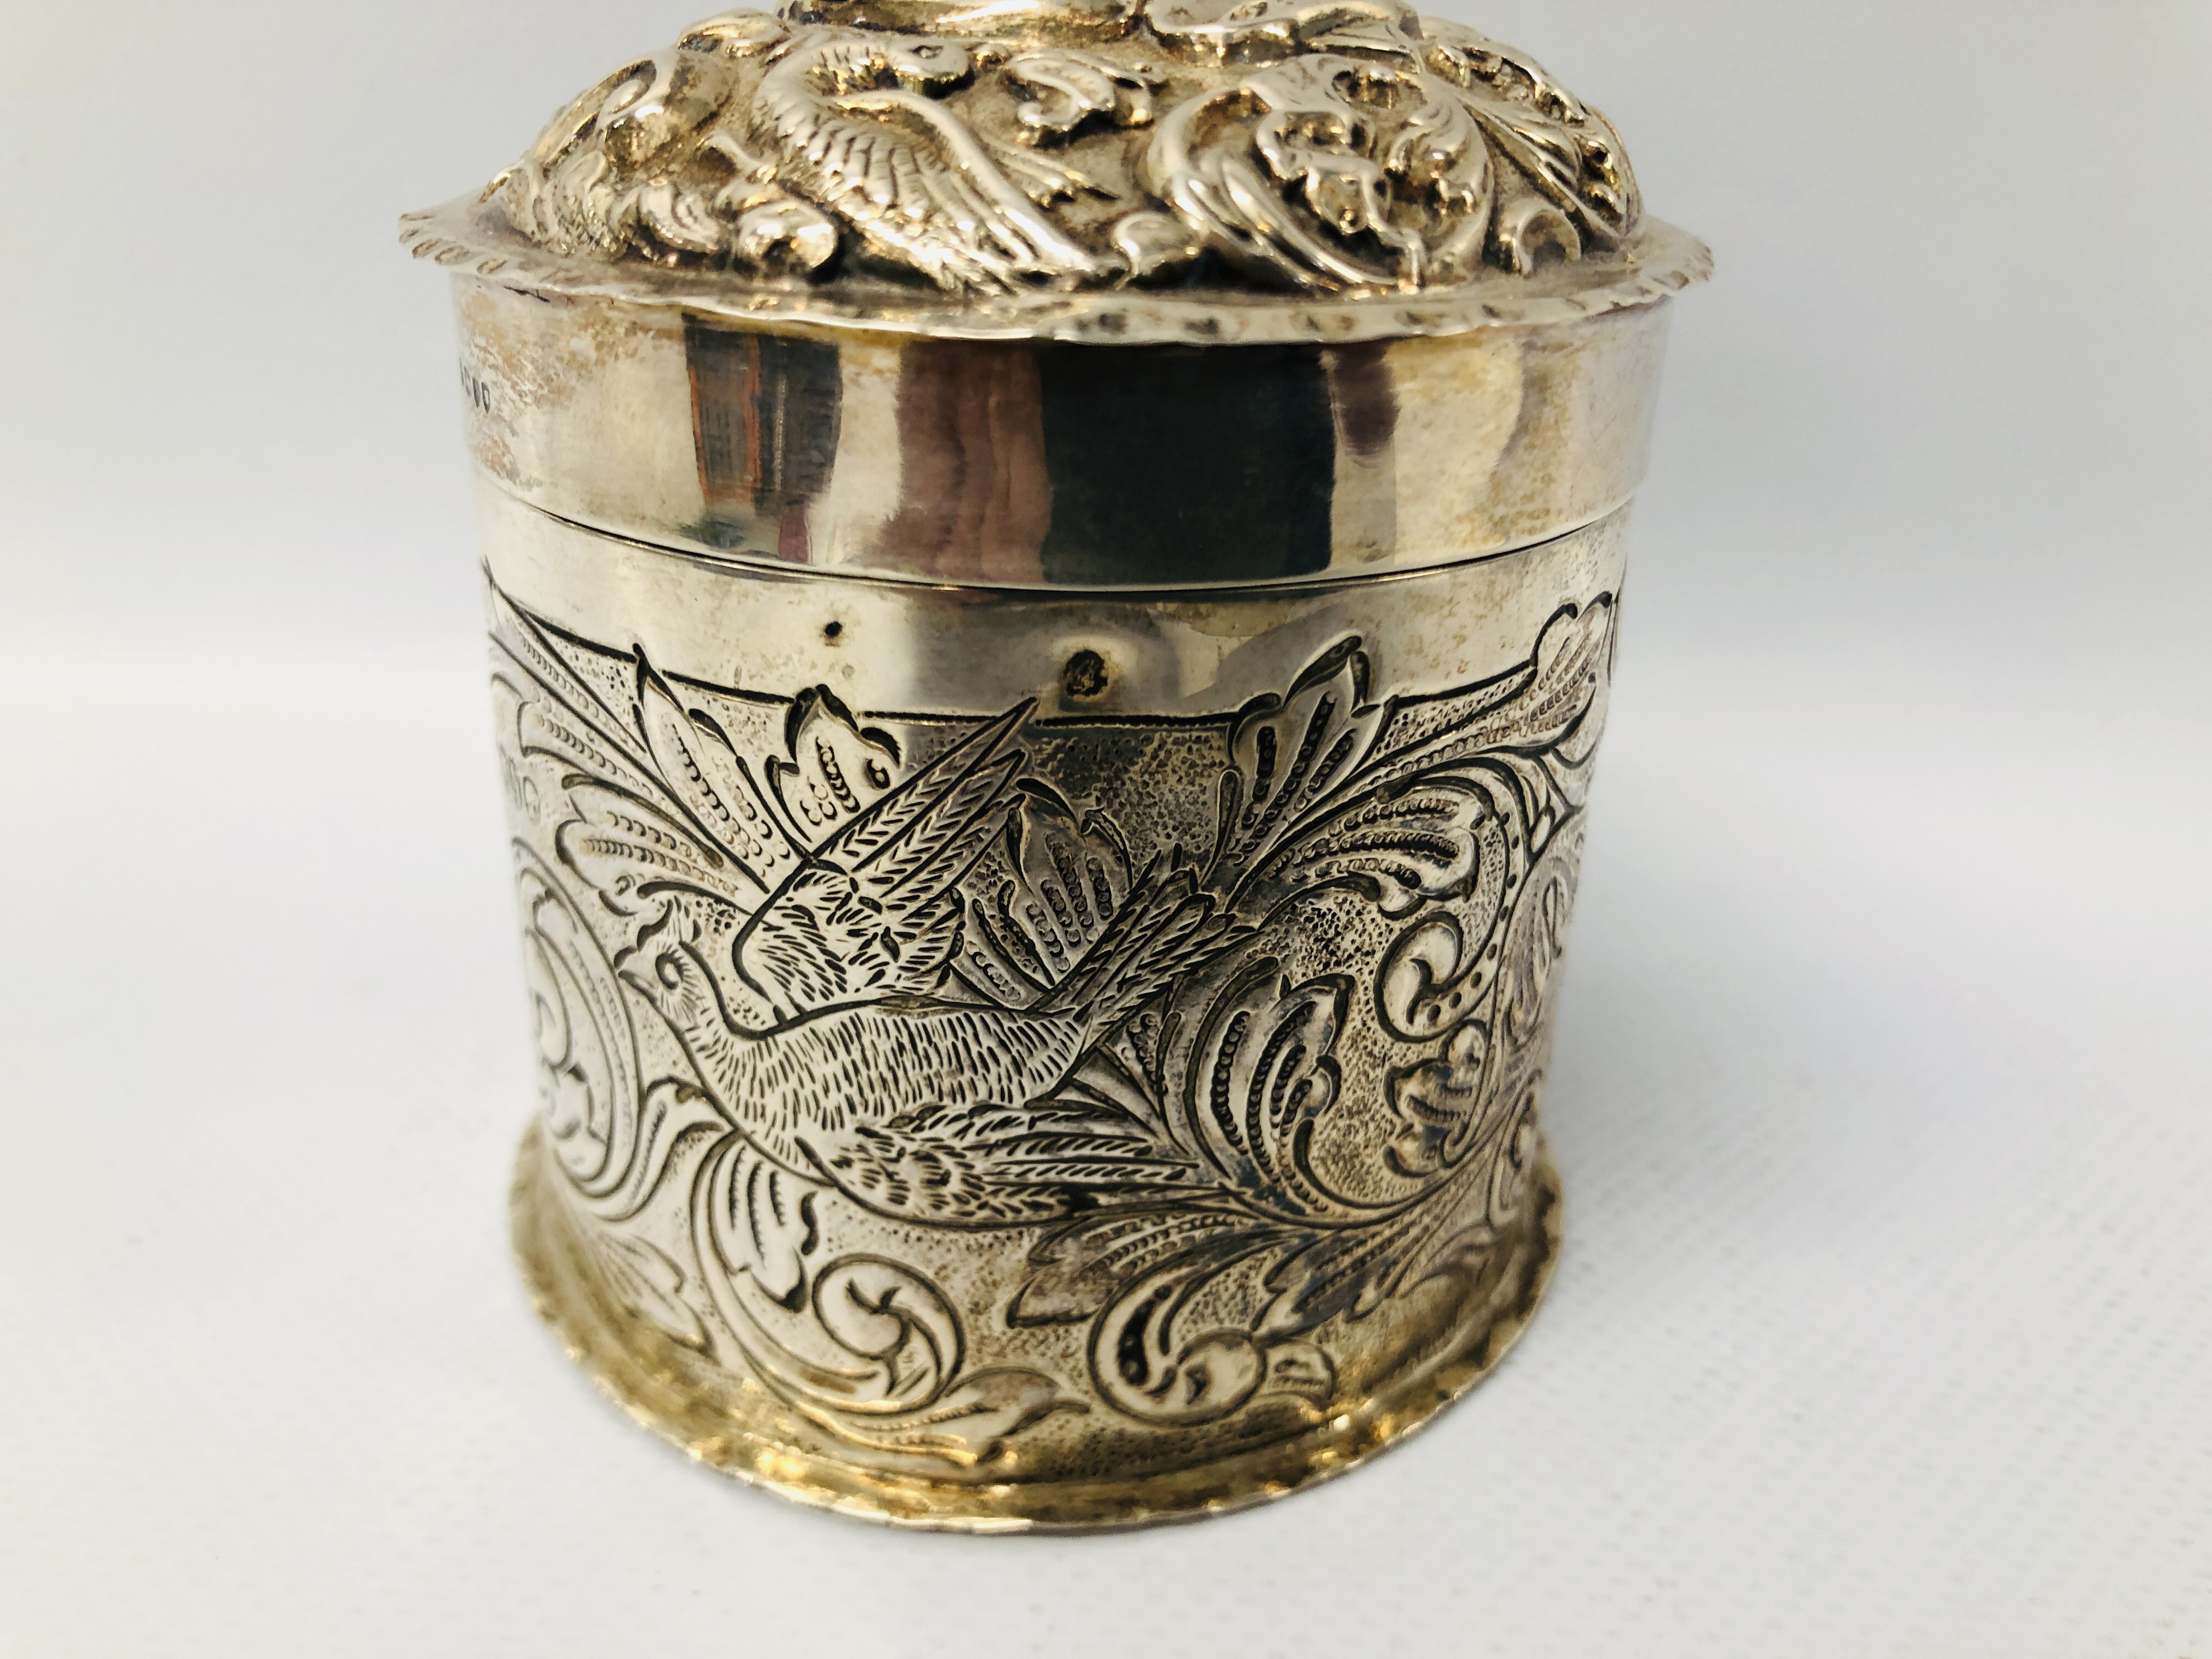 A VICTORIAN SILVER CYLINDRICAL BOX AND COVER DECORATED WITH BIRD LONDON 1888, WILLIAM COMINS - H 8. - Image 11 of 21